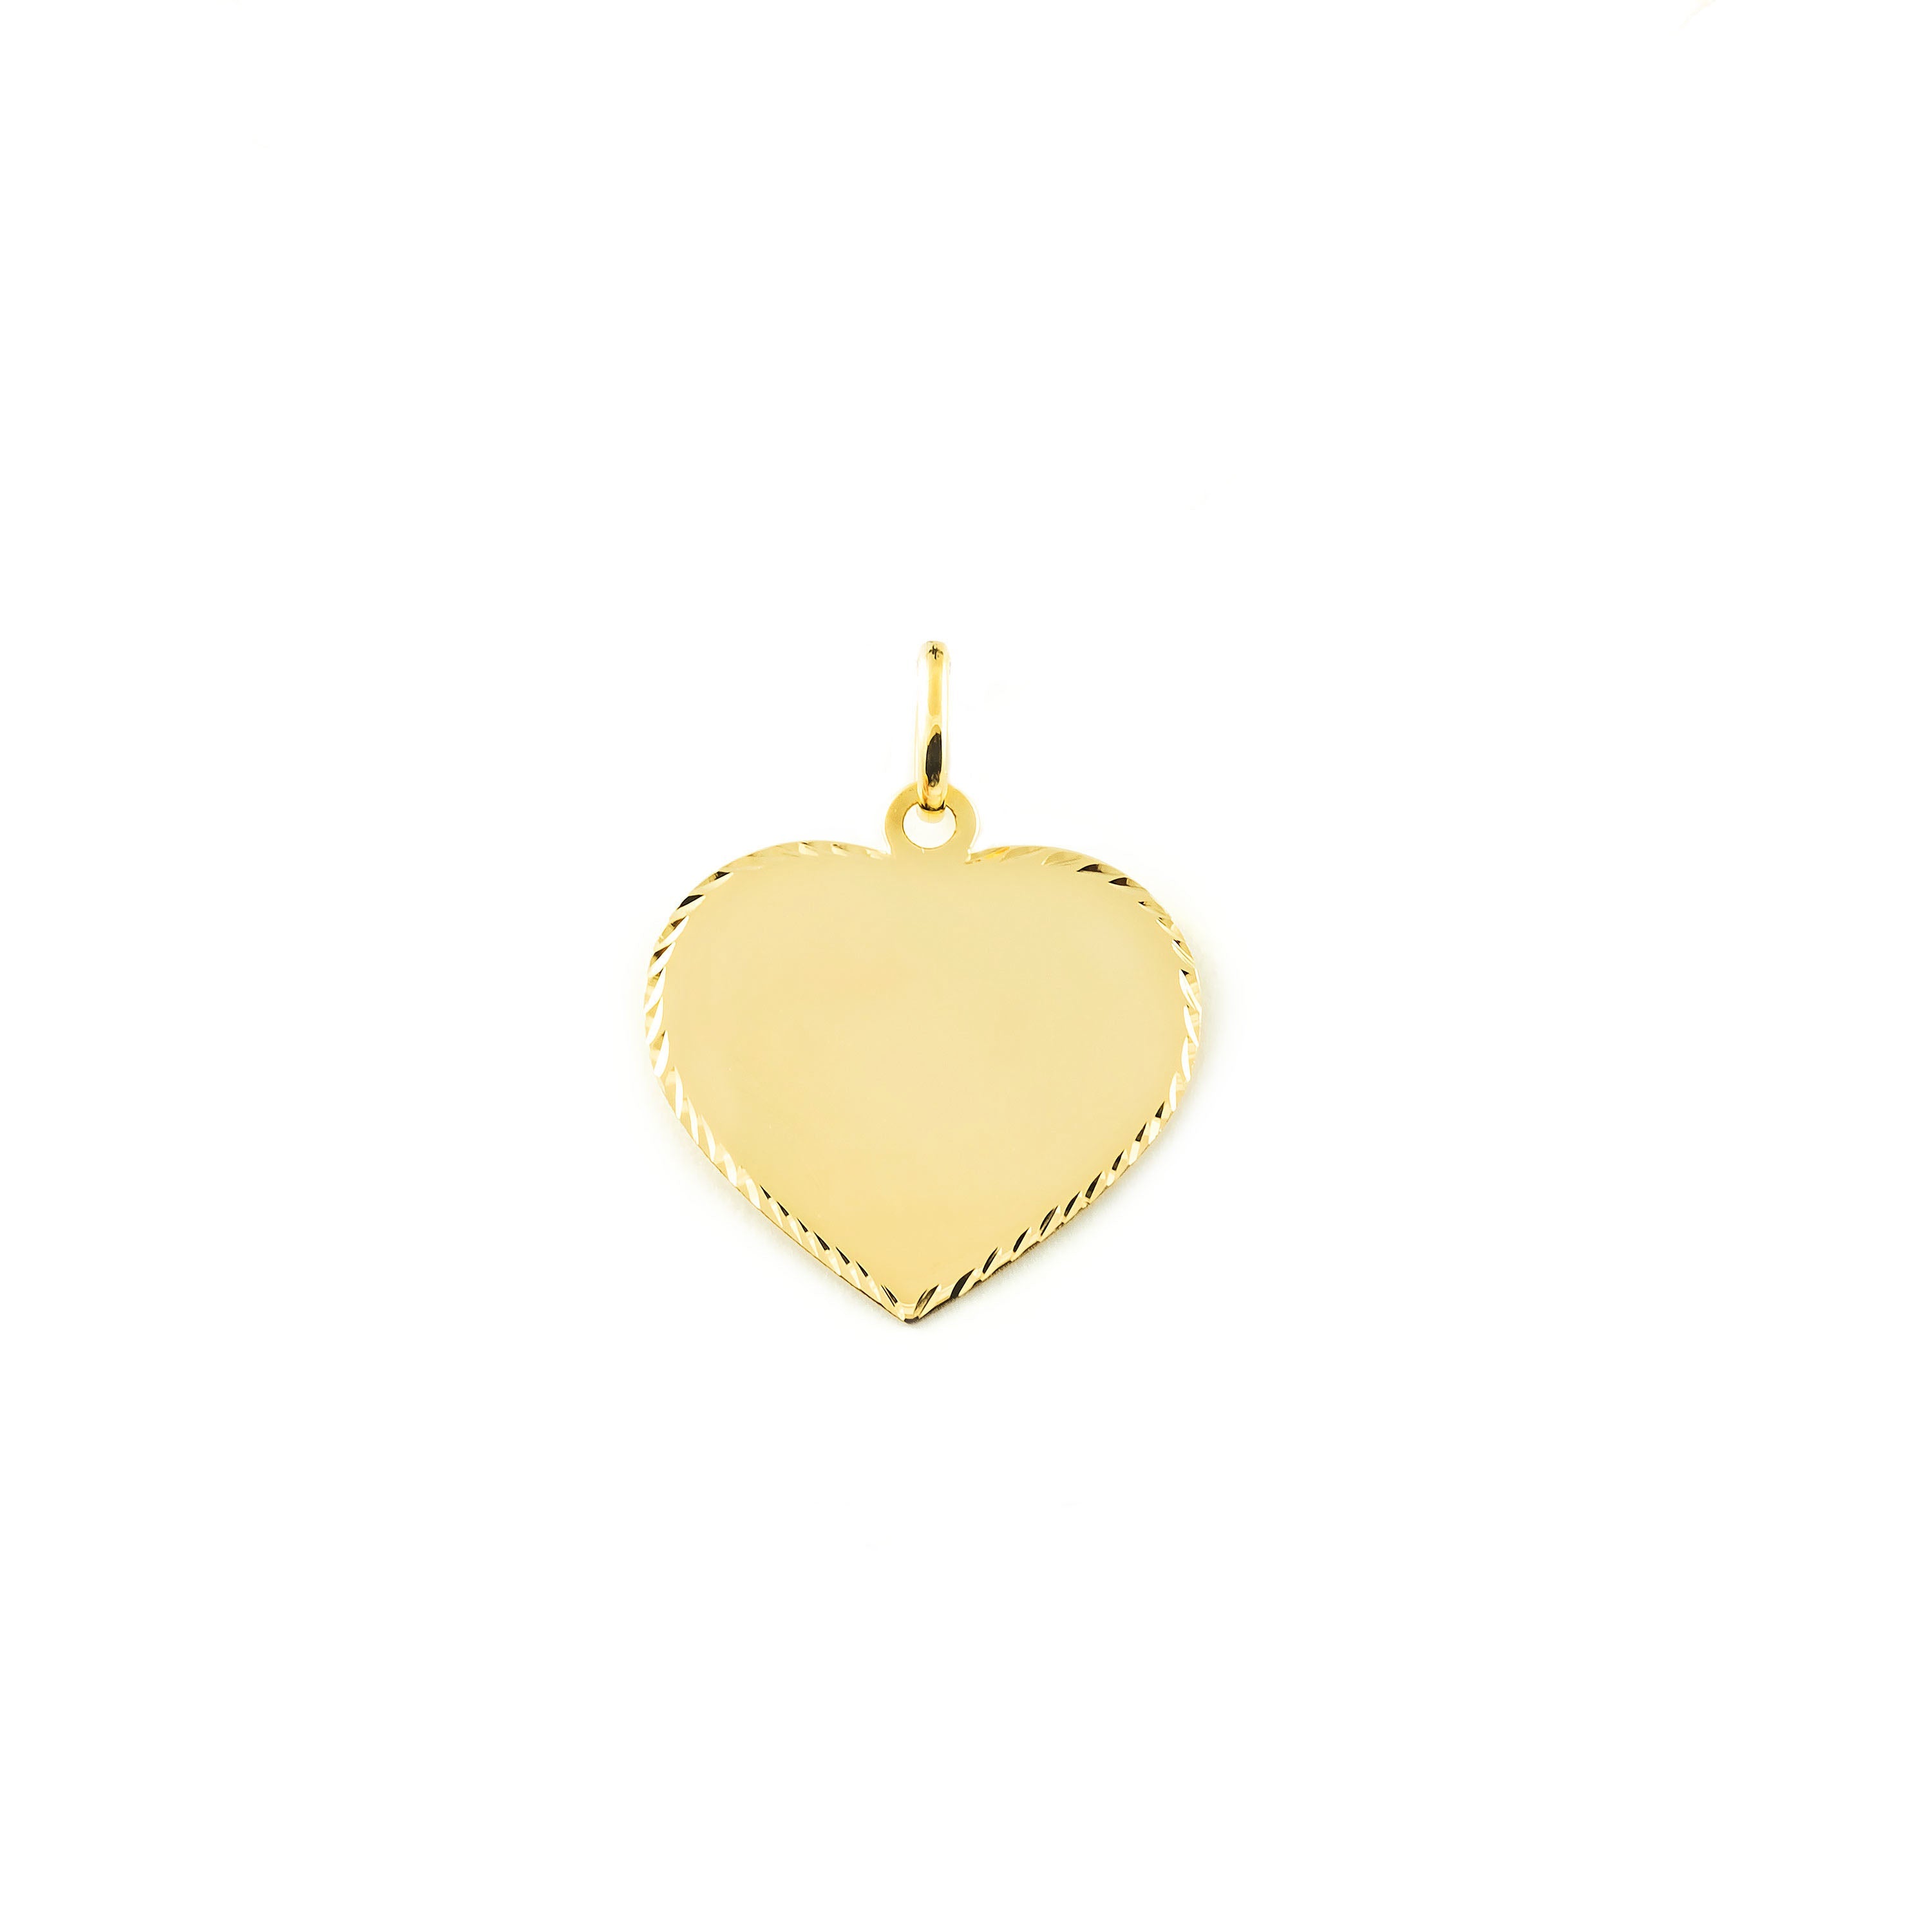 Personalized 9K Yellow Gold Medal Heart Shine and Texture 22 x 22 mm